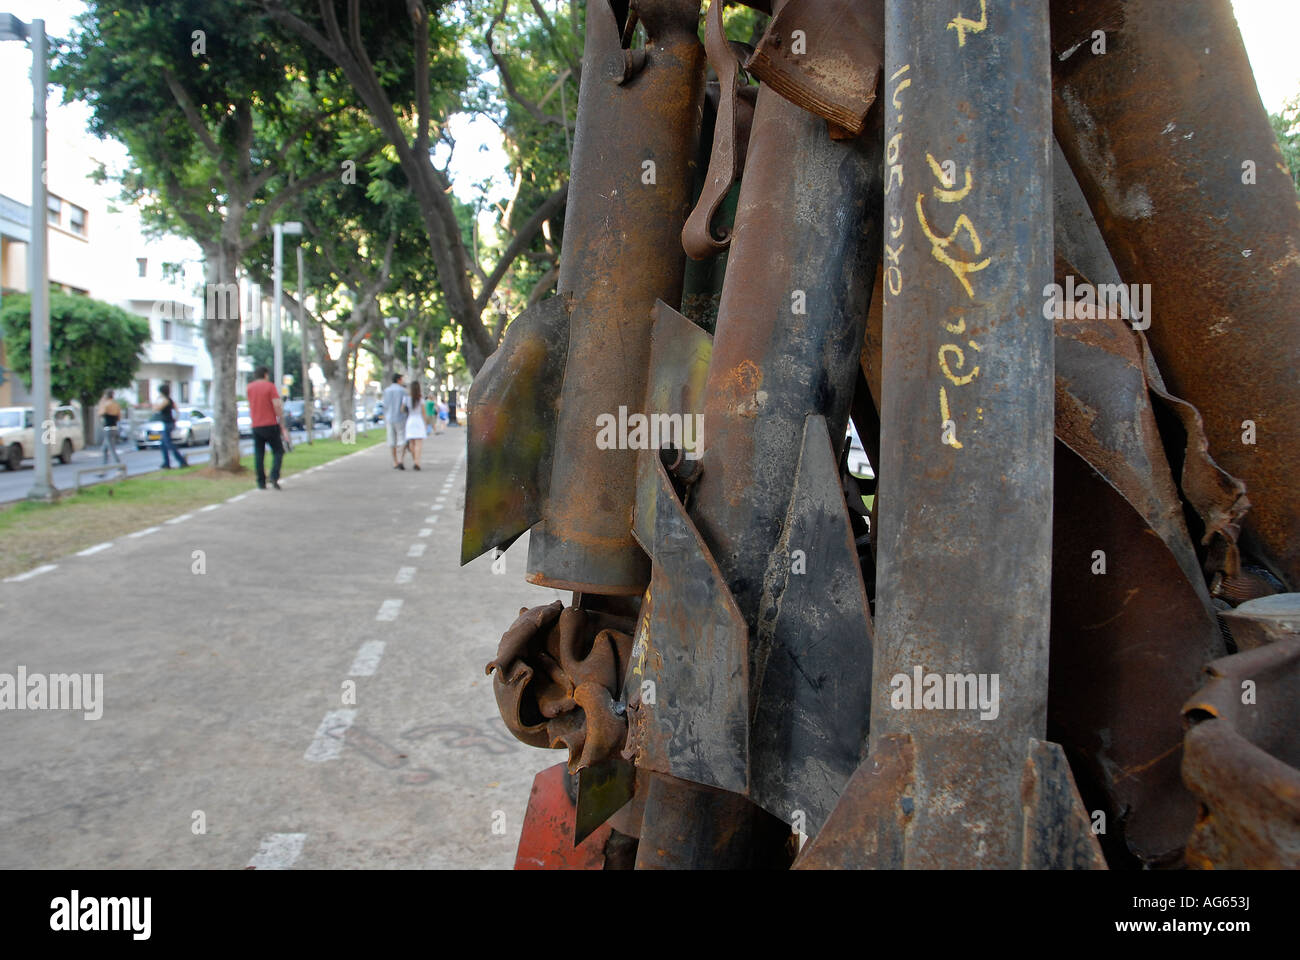 Remnants of exploded Qassam rockets that were fired from the Gaza Strip to southern Israel displayed in Rothschild avenue in Tel Aviv Israel Stock Photo